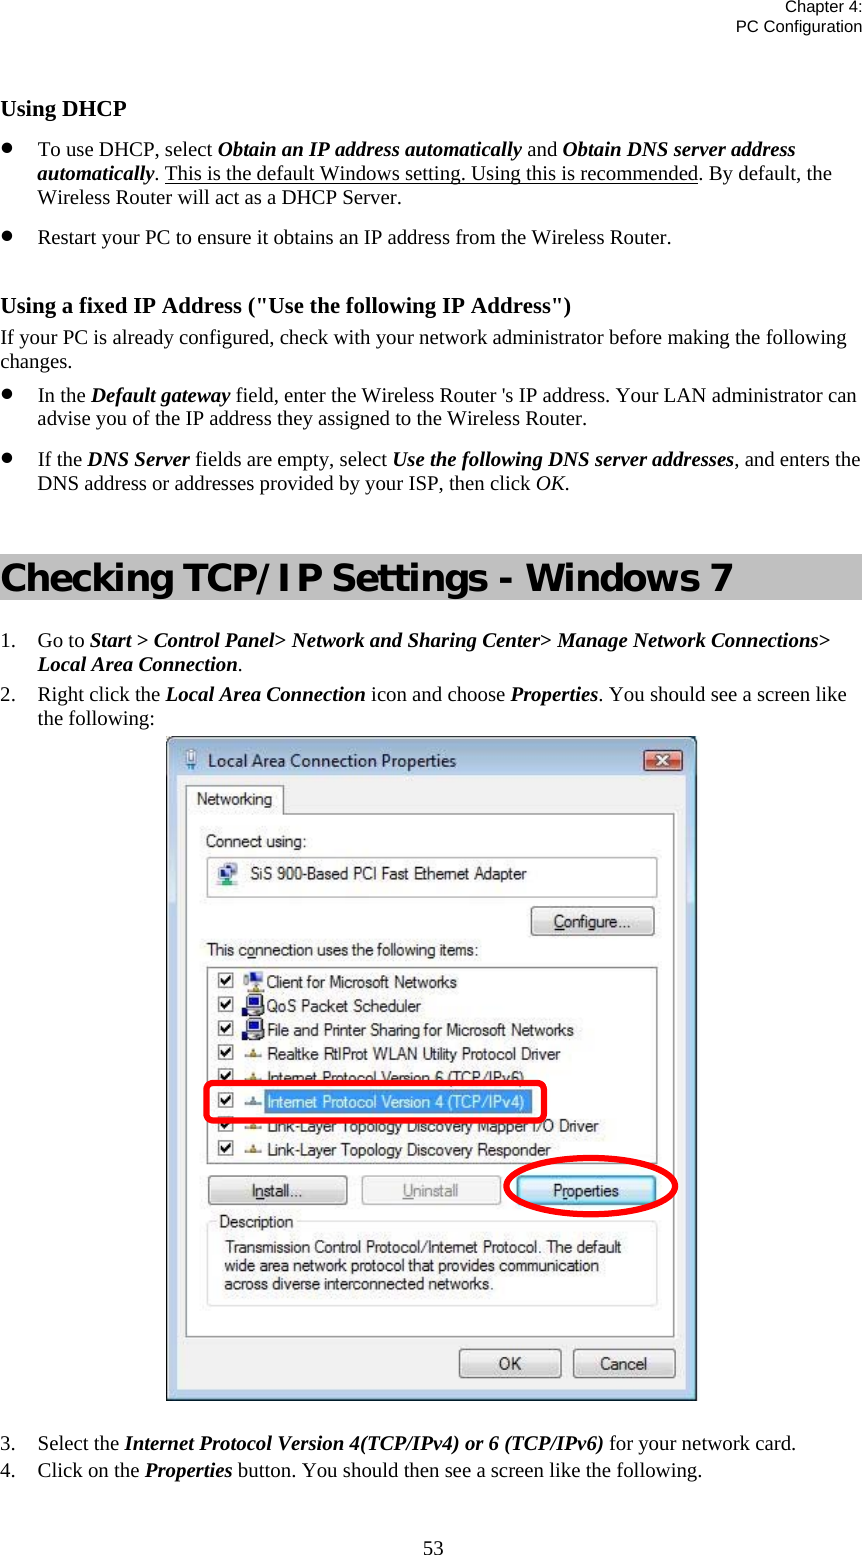   Chapter 4:  PC Configuration  53 Using DHCP • To use DHCP, select Obtain an IP address automatically and Obtain DNS server address automatically. This is the default Windows setting. Using this is recommended. By default, the Wireless Router will act as a DHCP Server. • Restart your PC to ensure it obtains an IP address from the Wireless Router.  Using a fixed IP Address (&quot;Use the following IP Address&quot;) If your PC is already configured, check with your network administrator before making the following changes. • In the Default gateway field, enter the Wireless Router &apos;s IP address. Your LAN administrator can advise you of the IP address they assigned to the Wireless Router. • If the DNS Server fields are empty, select Use the following DNS server addresses, and enters the DNS address or addresses provided by your ISP, then click OK.  Checking TCP/IP Settings - Windows 7 1. Go to Start &gt; Control Panel&gt; Network and Sharing Center&gt; Manage Network Connections&gt; Local Area Connection. 2. Right click the Local Area Connection icon and choose Properties. You should see a screen like the following:  3. Select the Internet Protocol Version 4(TCP/IPv4) or 6 (TCP/IPv6) for your network card. 4. Click on the Properties button. You should then see a screen like the following. 